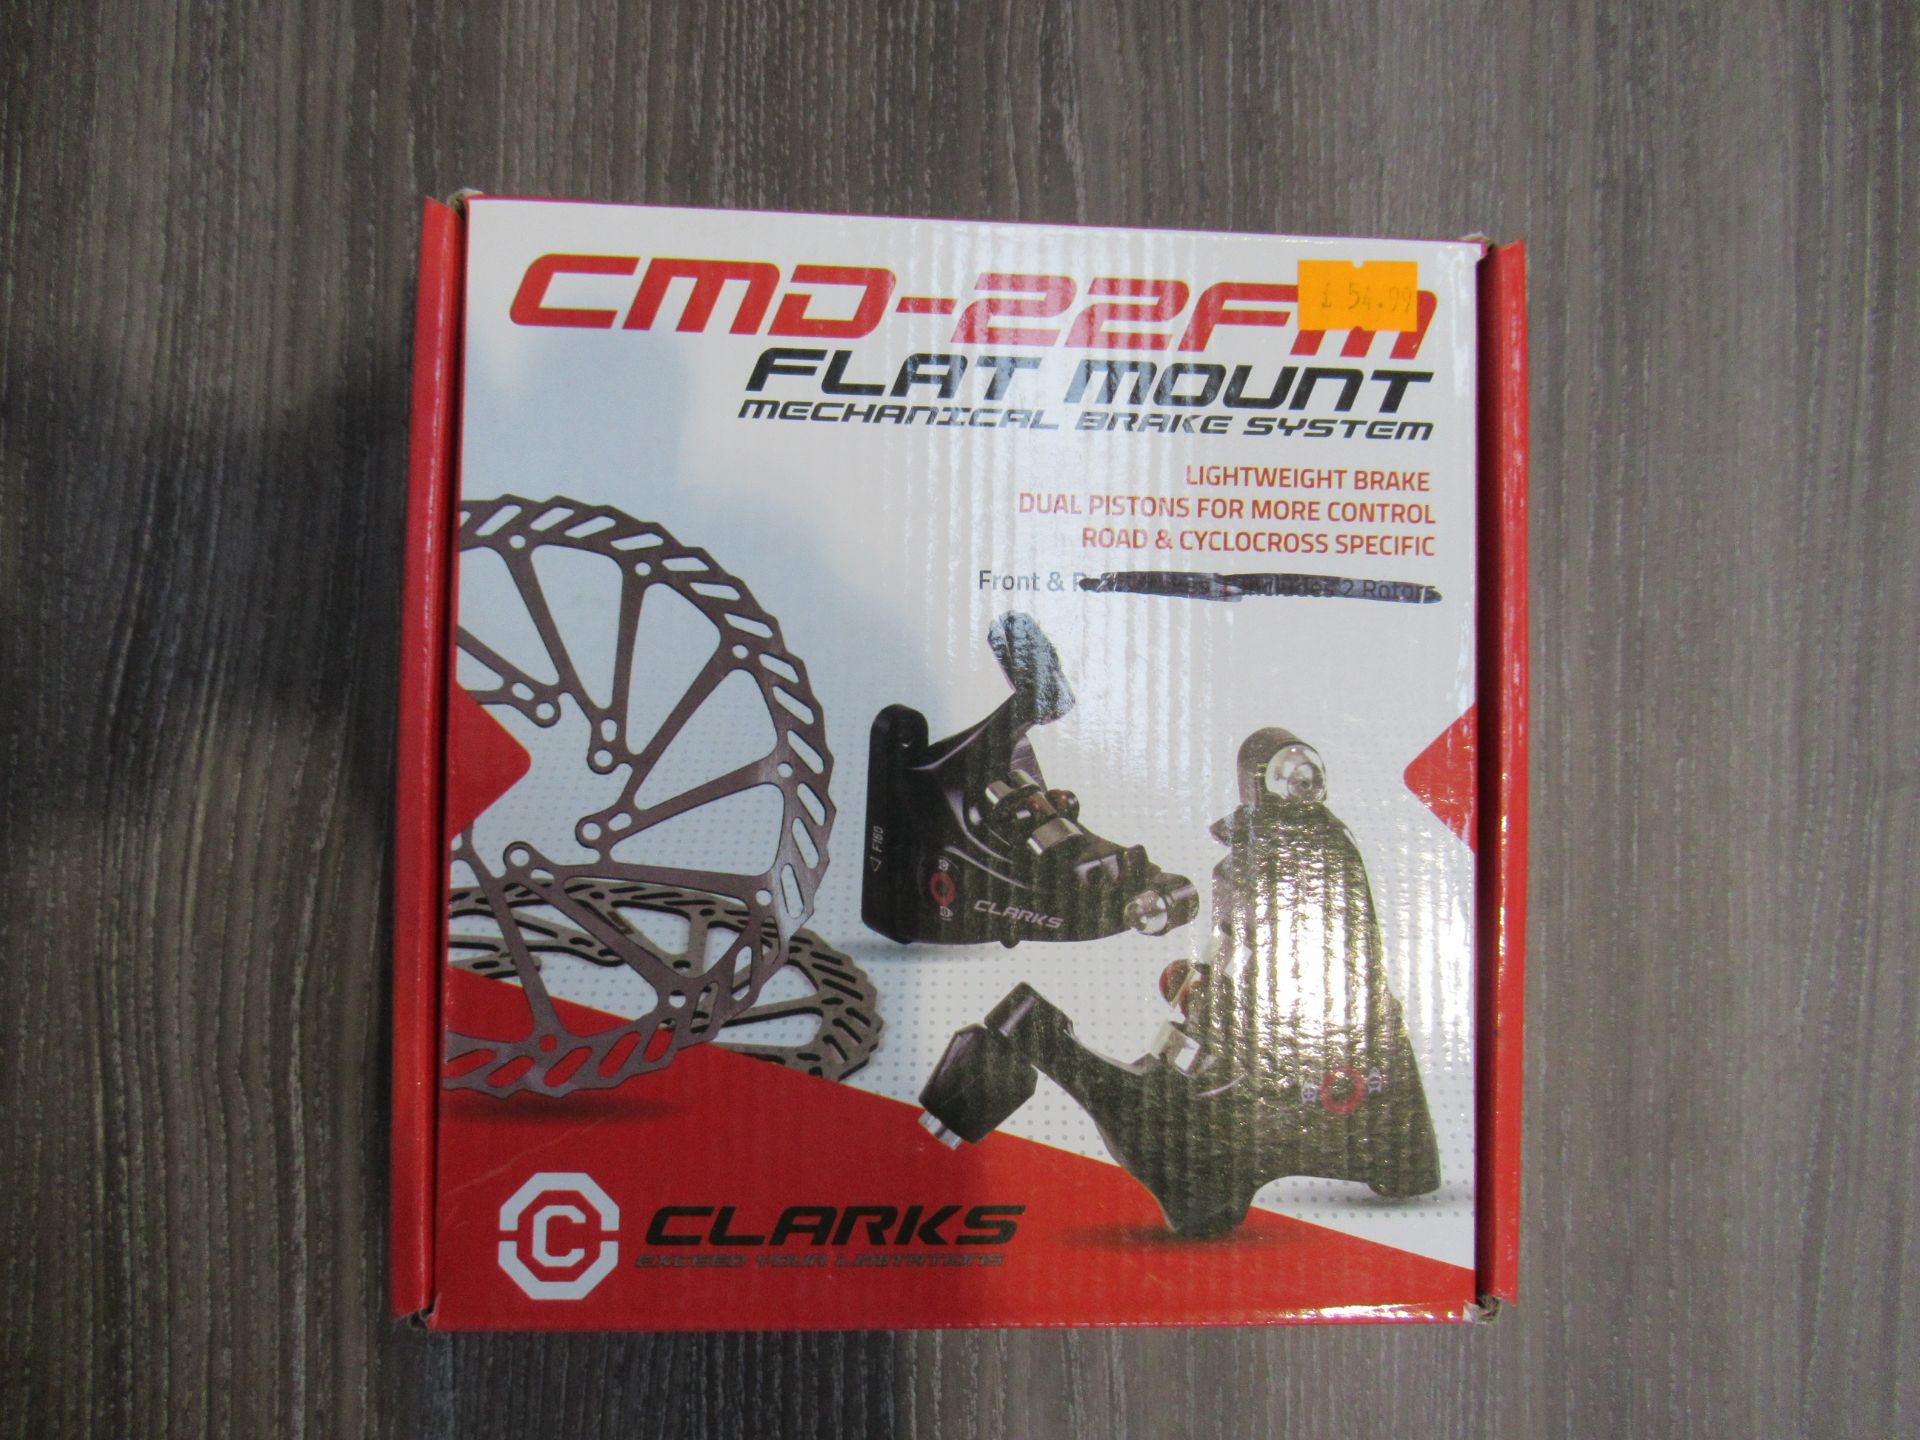 3 x Clarks CMD-22FM Flat Mount Mechanical Brake systems - 1 x missing rear set (RRP£54.99) 2 x compl - Image 2 of 4